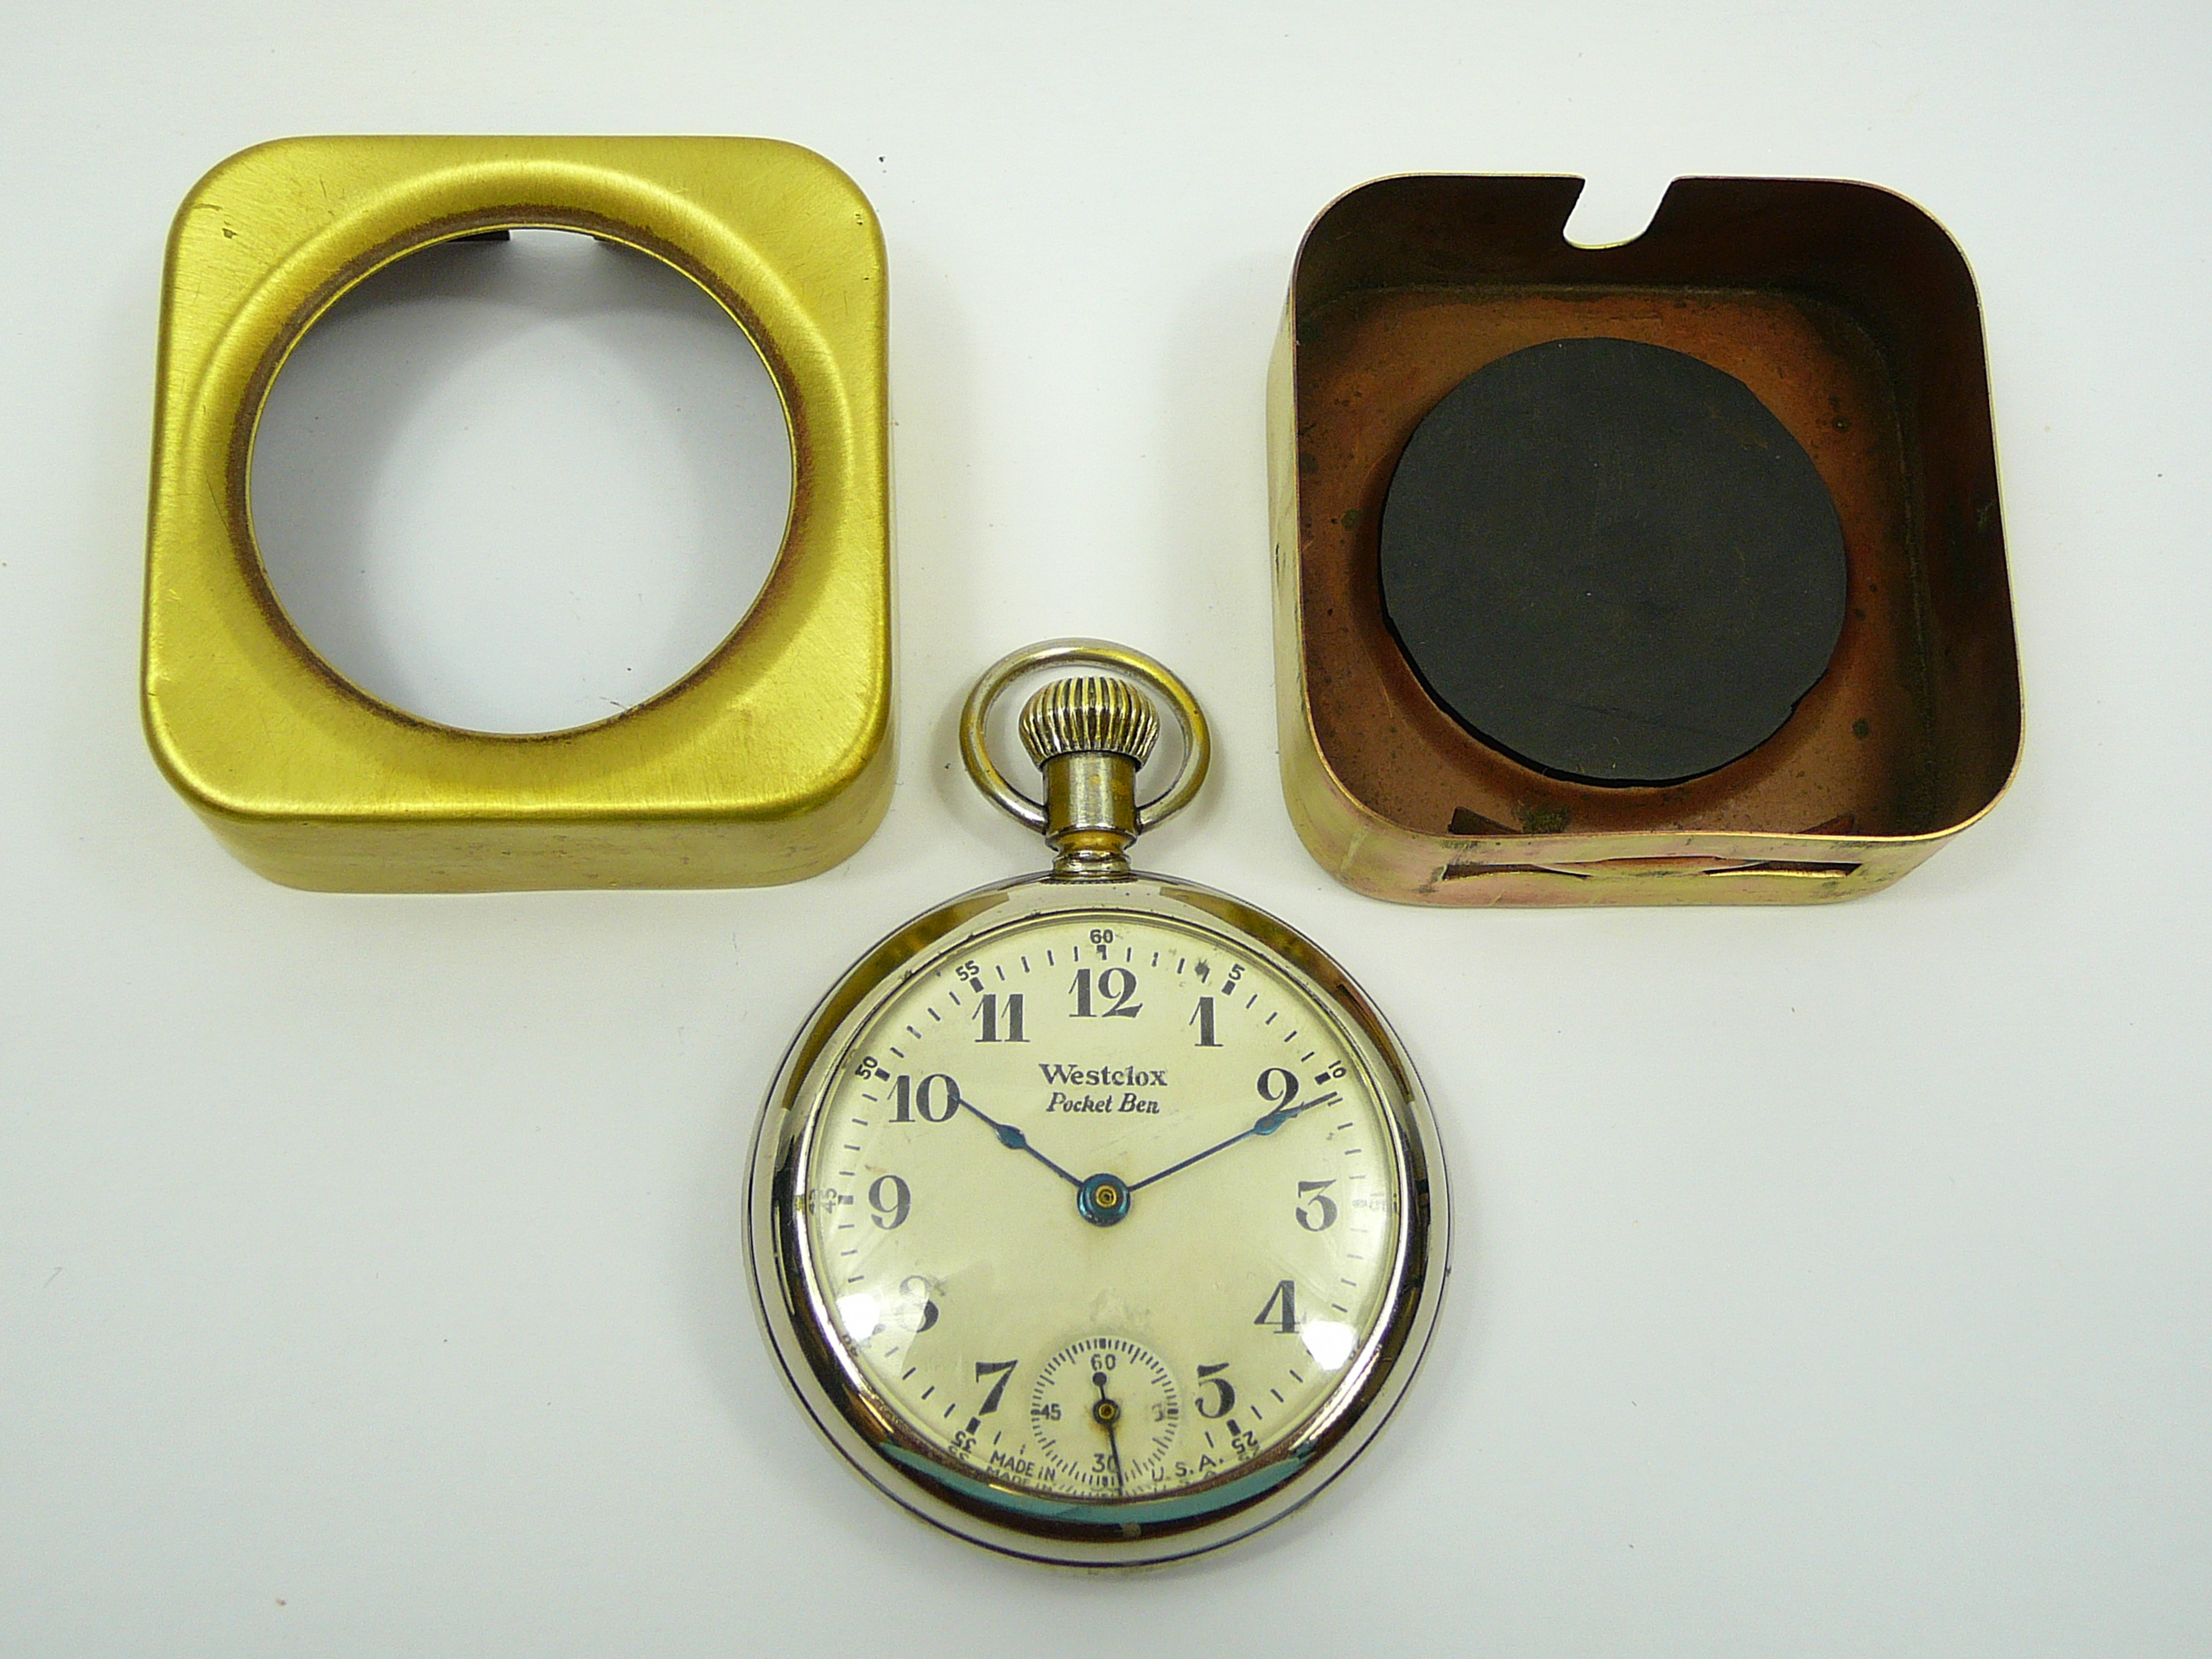 Brass watch case and pocketwatch - Image 4 of 5